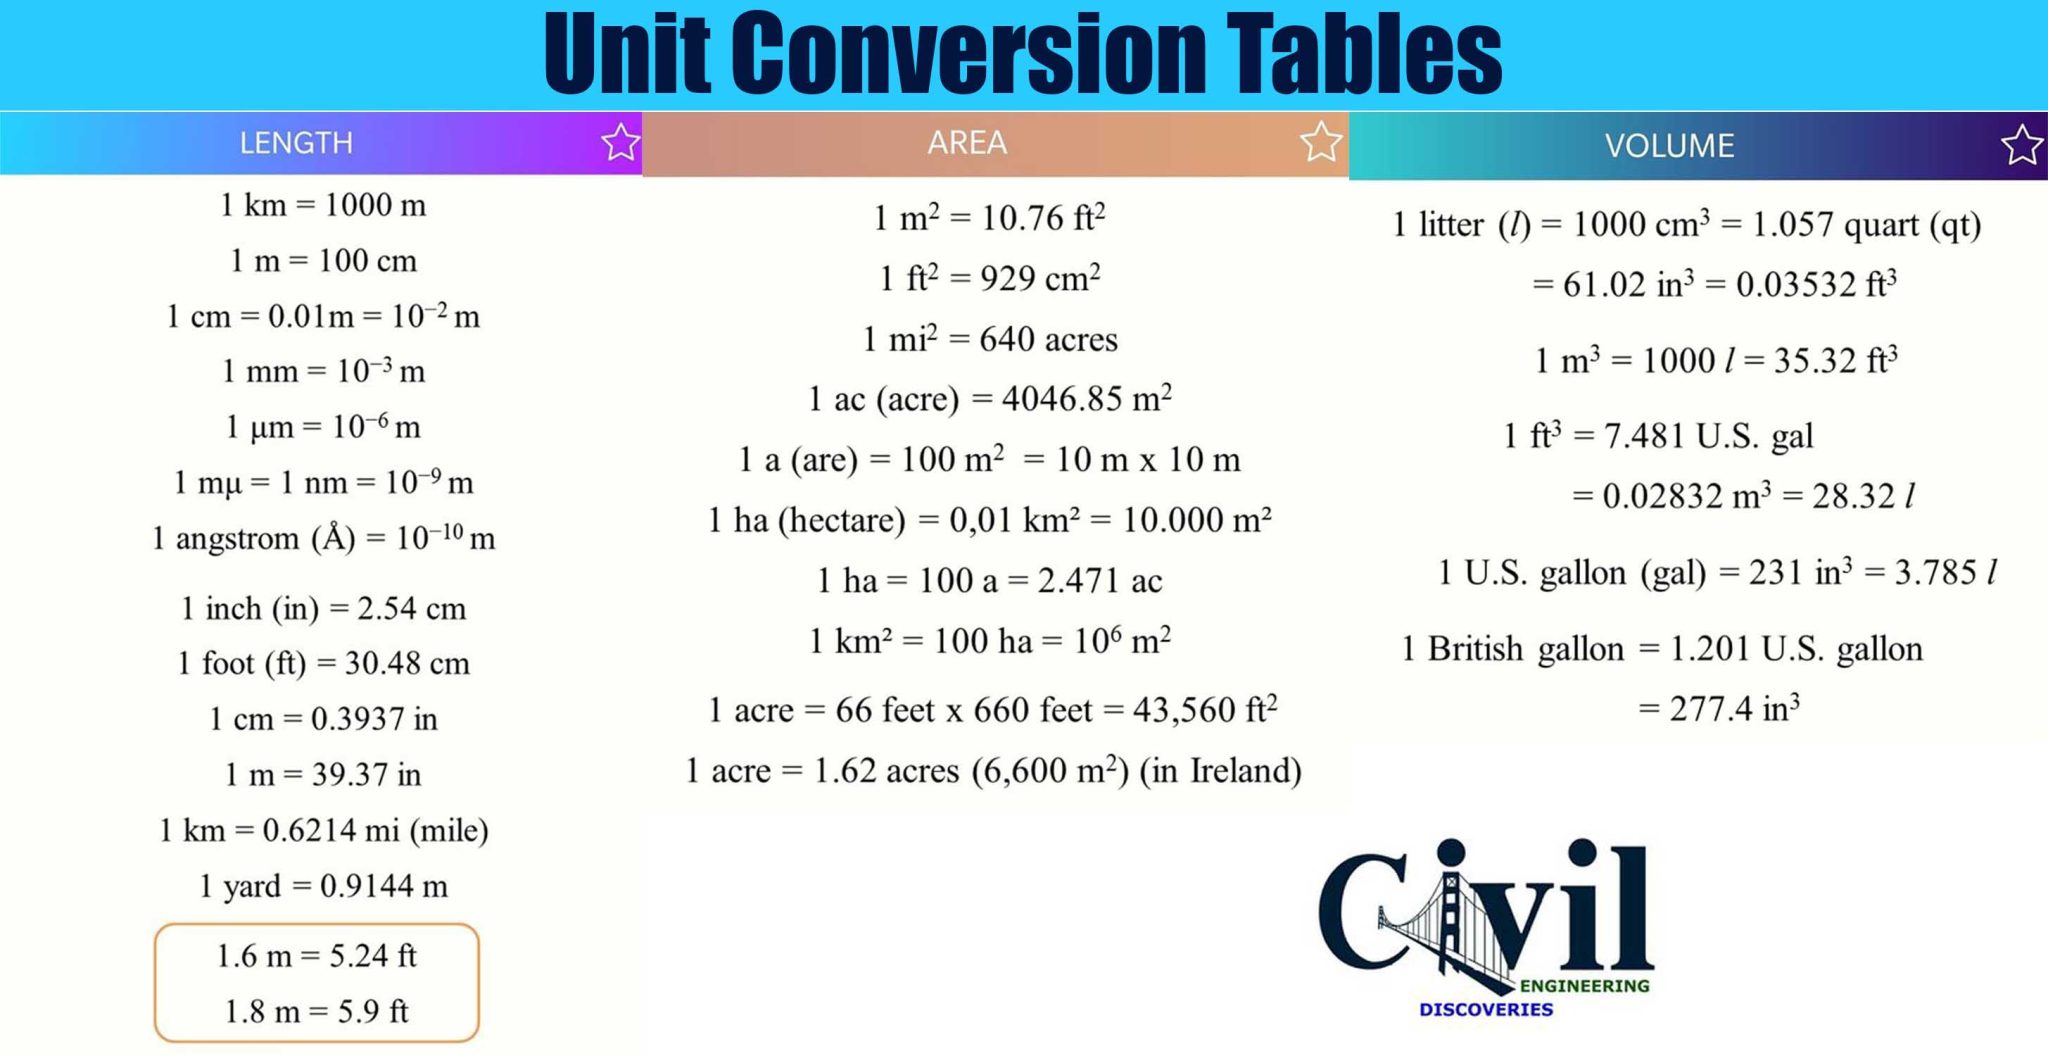 unit-conversion-tables-engineering-discoveries